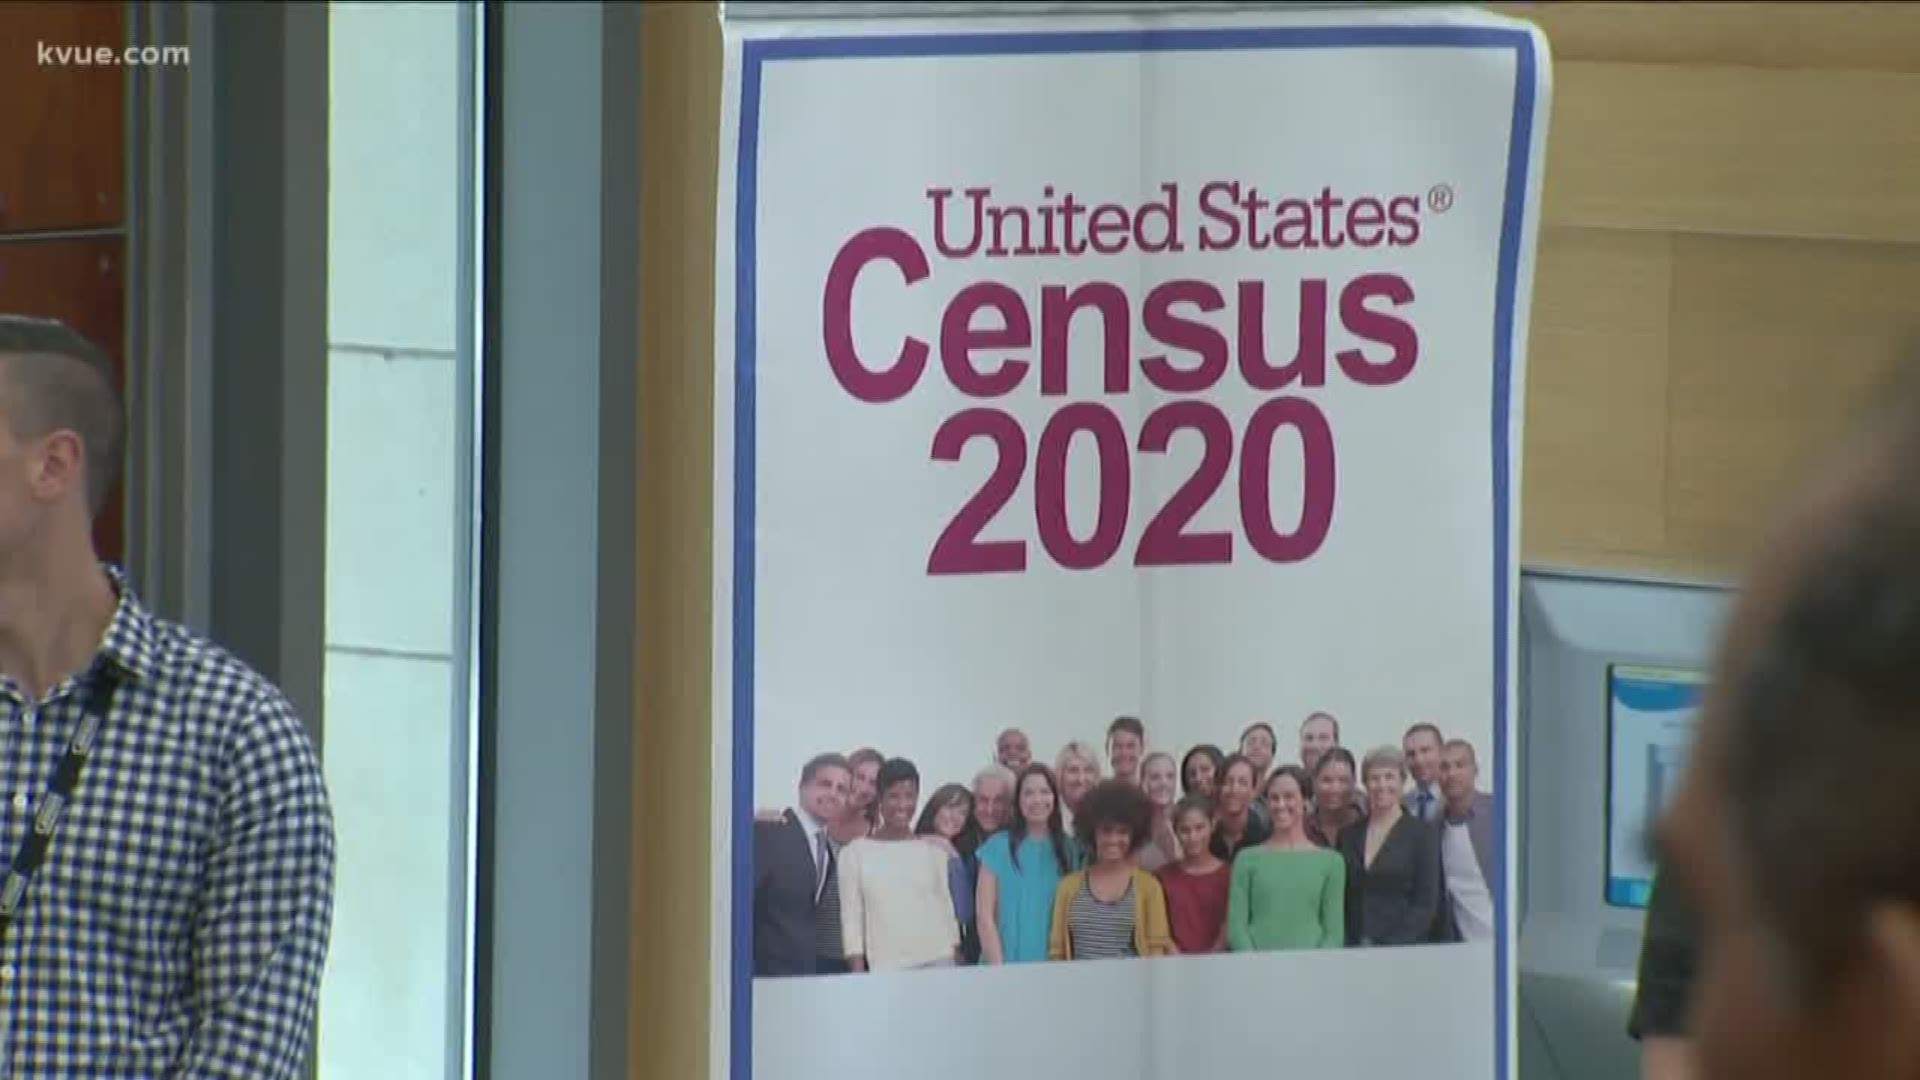 The U.S. Census Bureau is celebrating the opening of two new offices in the Austin area.